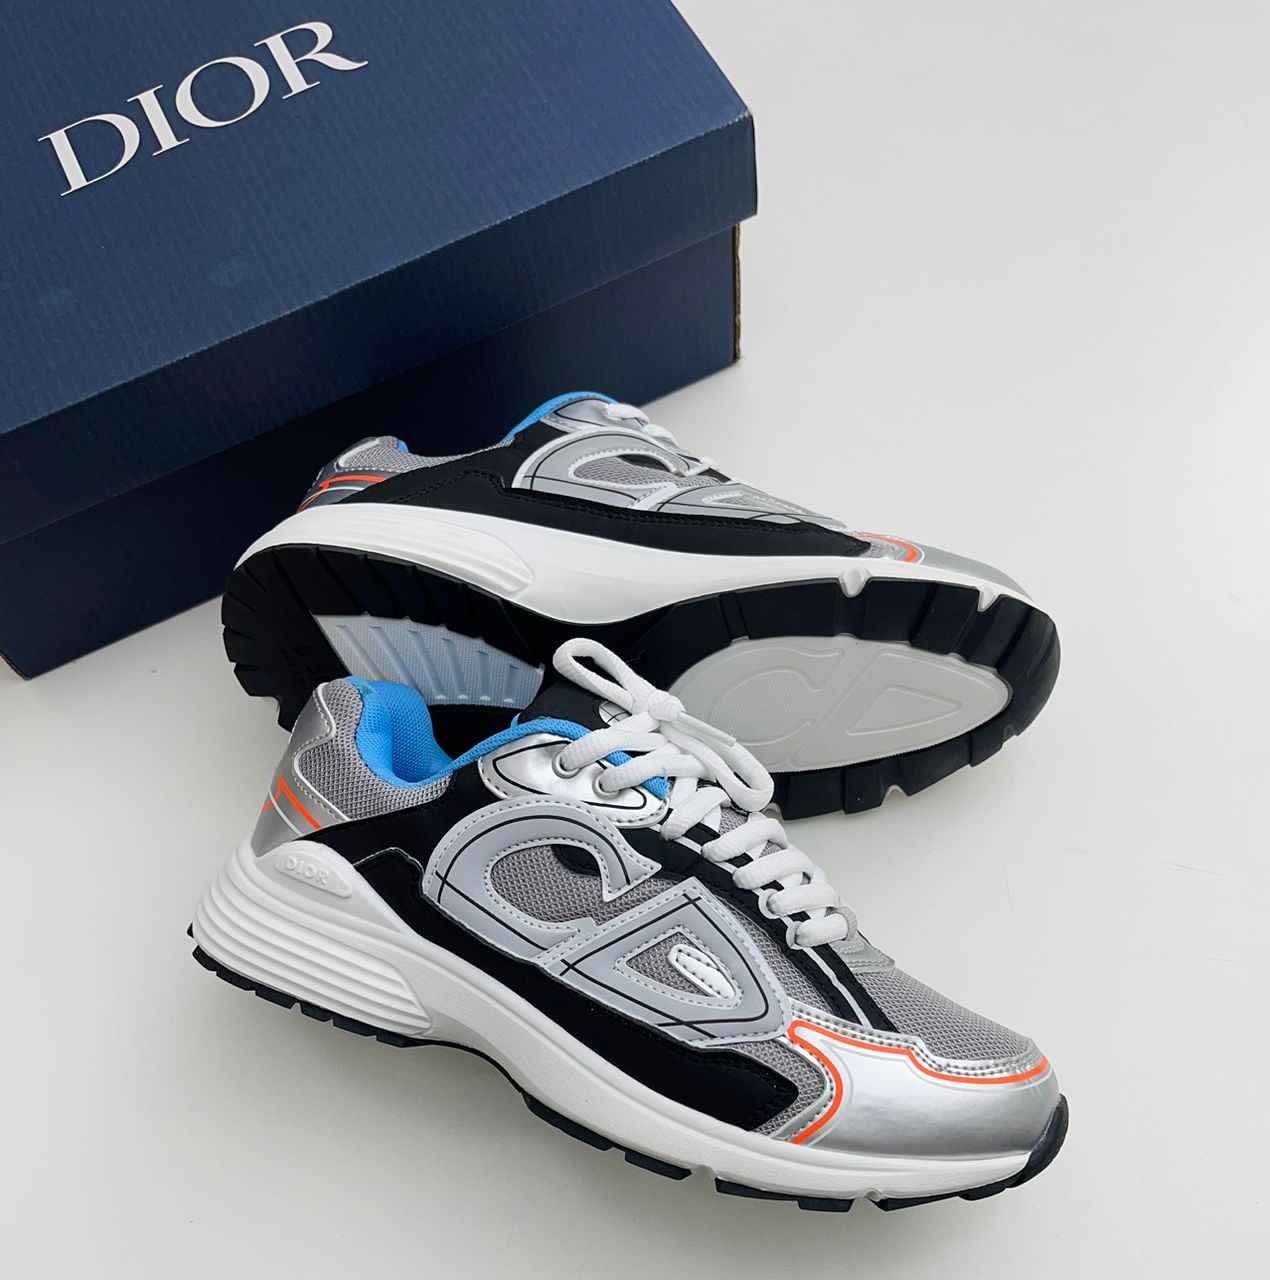 Christian Dior - B30 "Casey Colored" sneakers